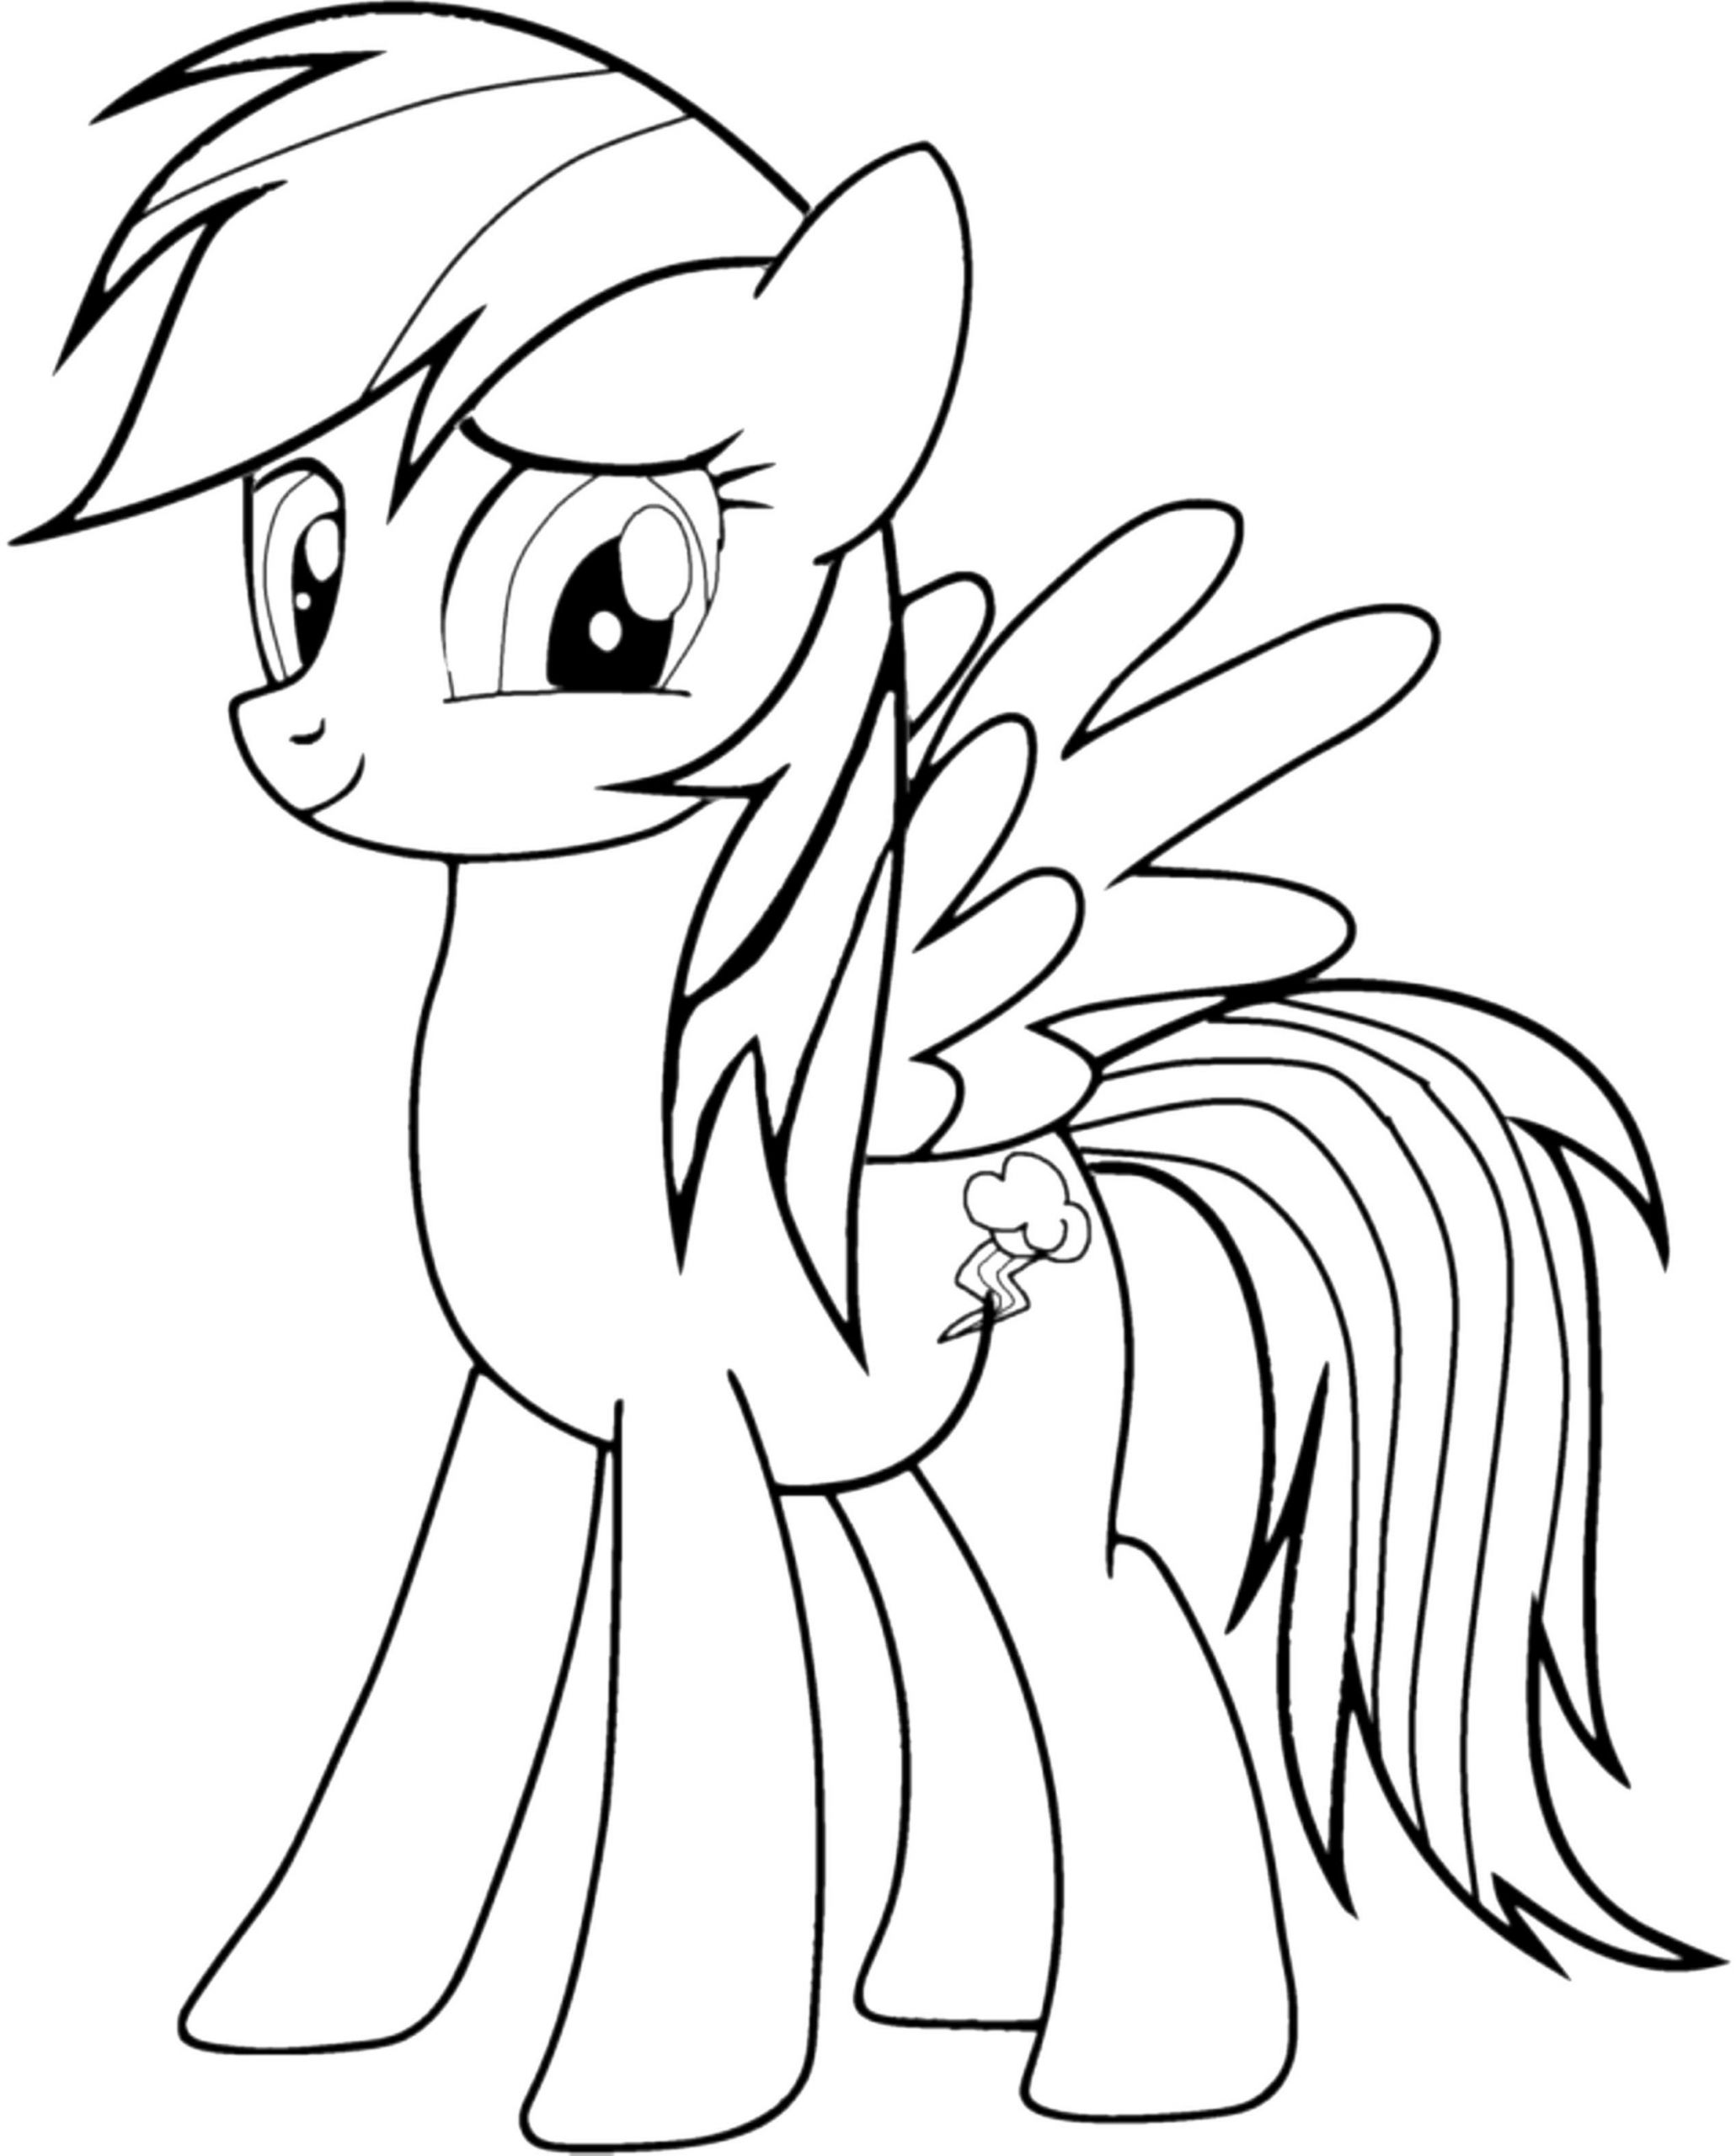 Rainbow Coloring Pages Free Printable
 Rainbow Dash Coloring Pages Best Coloring Pages For Kids